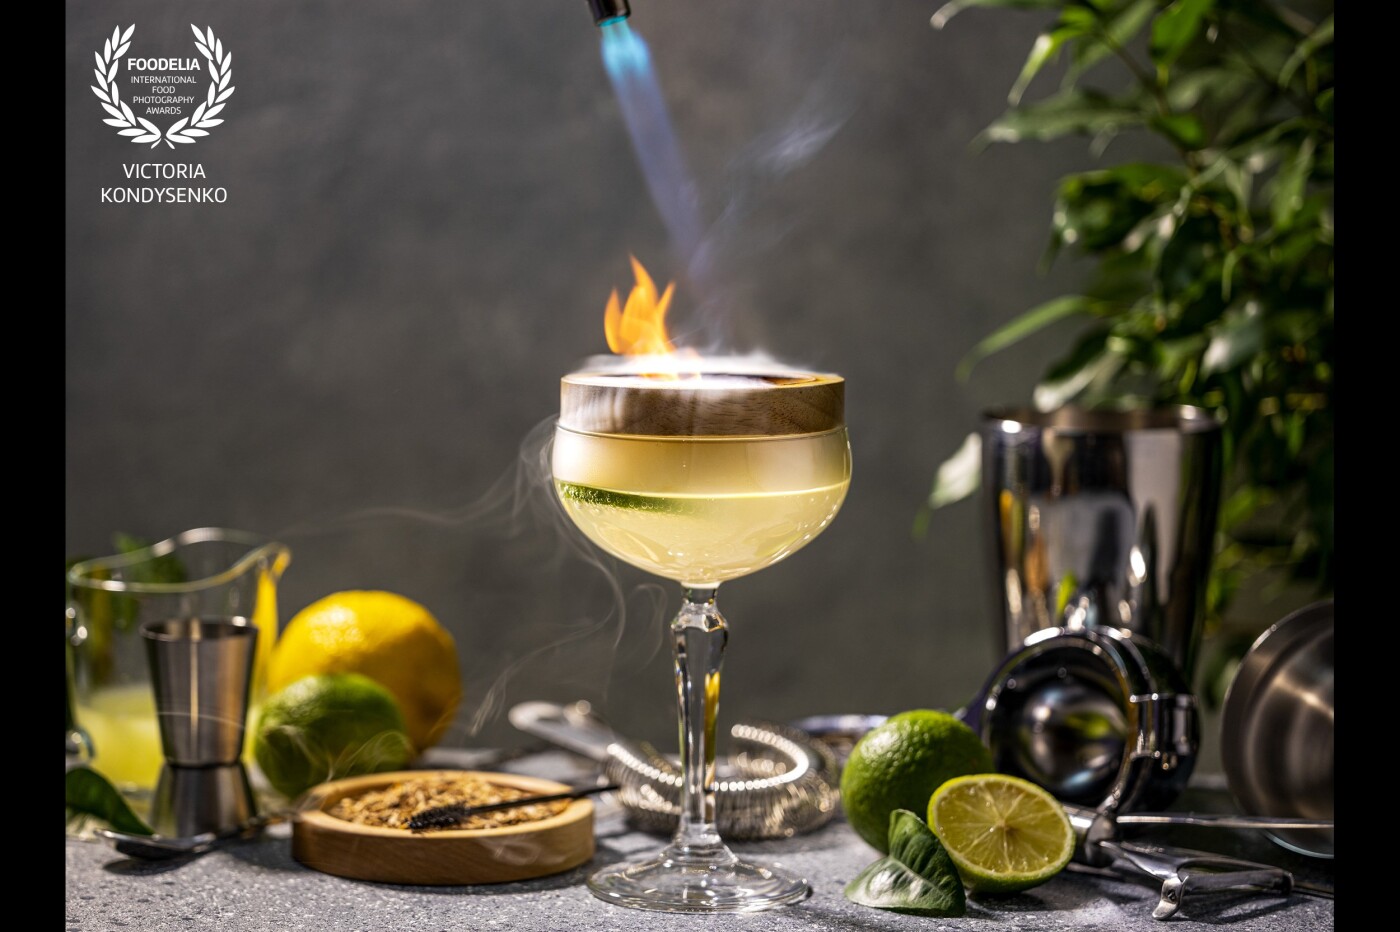 Smoked Daiquiri. Adding smoke to this classic cocktail adds depth of flavor that complements the rum and citrus juice. An opportunity to try a new taste of a classic drink.